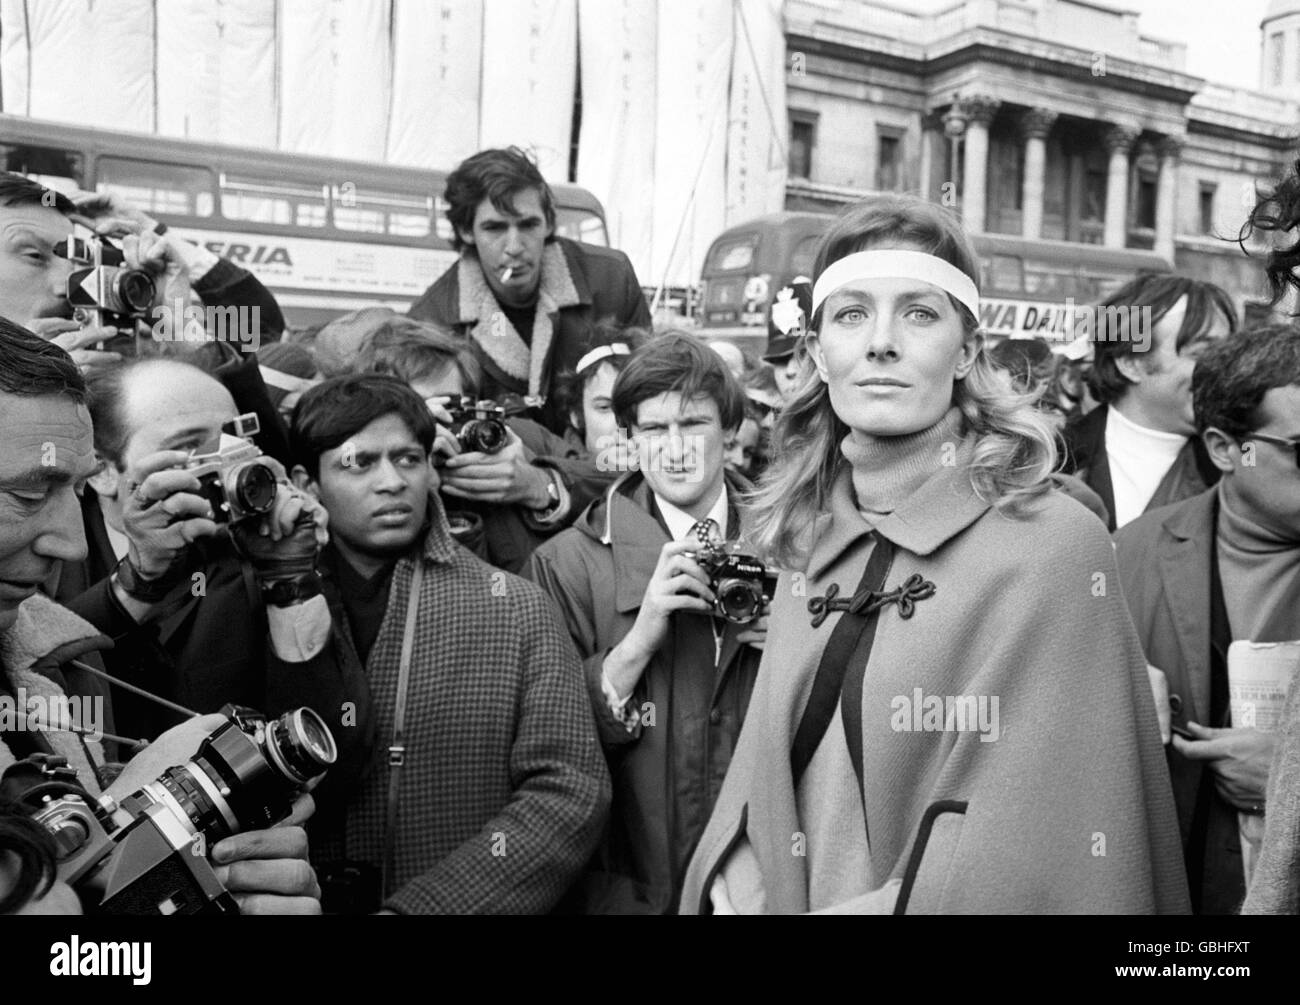 Actress Vanessa Redgrave, wearing a white mourning band around her head as she joins the anti-Vietnam war protest in Trafalgar Square. She was among the speakers who addressed a crowd estimated at nearly 10,000. Stock Photo